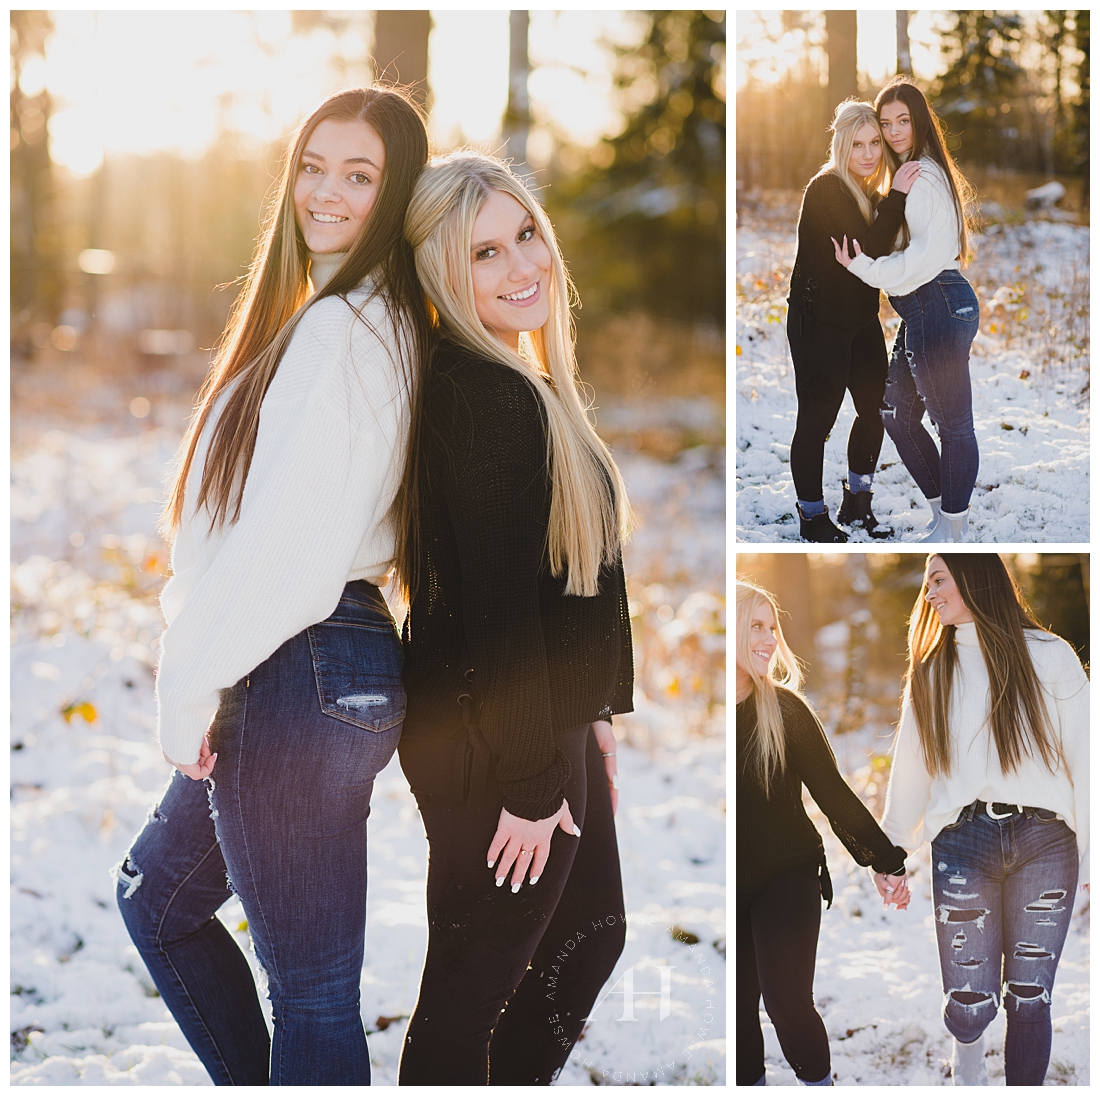 Two Senior Girls in the Snow | Senior Portraits, Winter Snow, Where to Take Outdoor Winter Portraits in Tacoma, Outfit Inspo, Hair and Makeup for Senior Photos | Photographed by the Best Tacoma Senior Photographer Amanda Howse